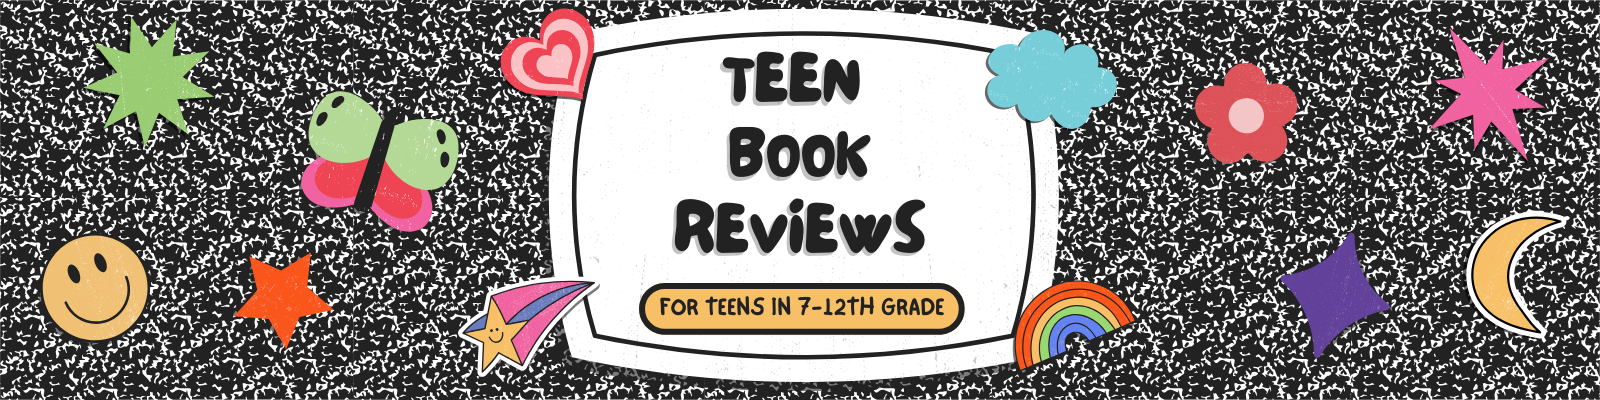 Teen Review Banner Image.png